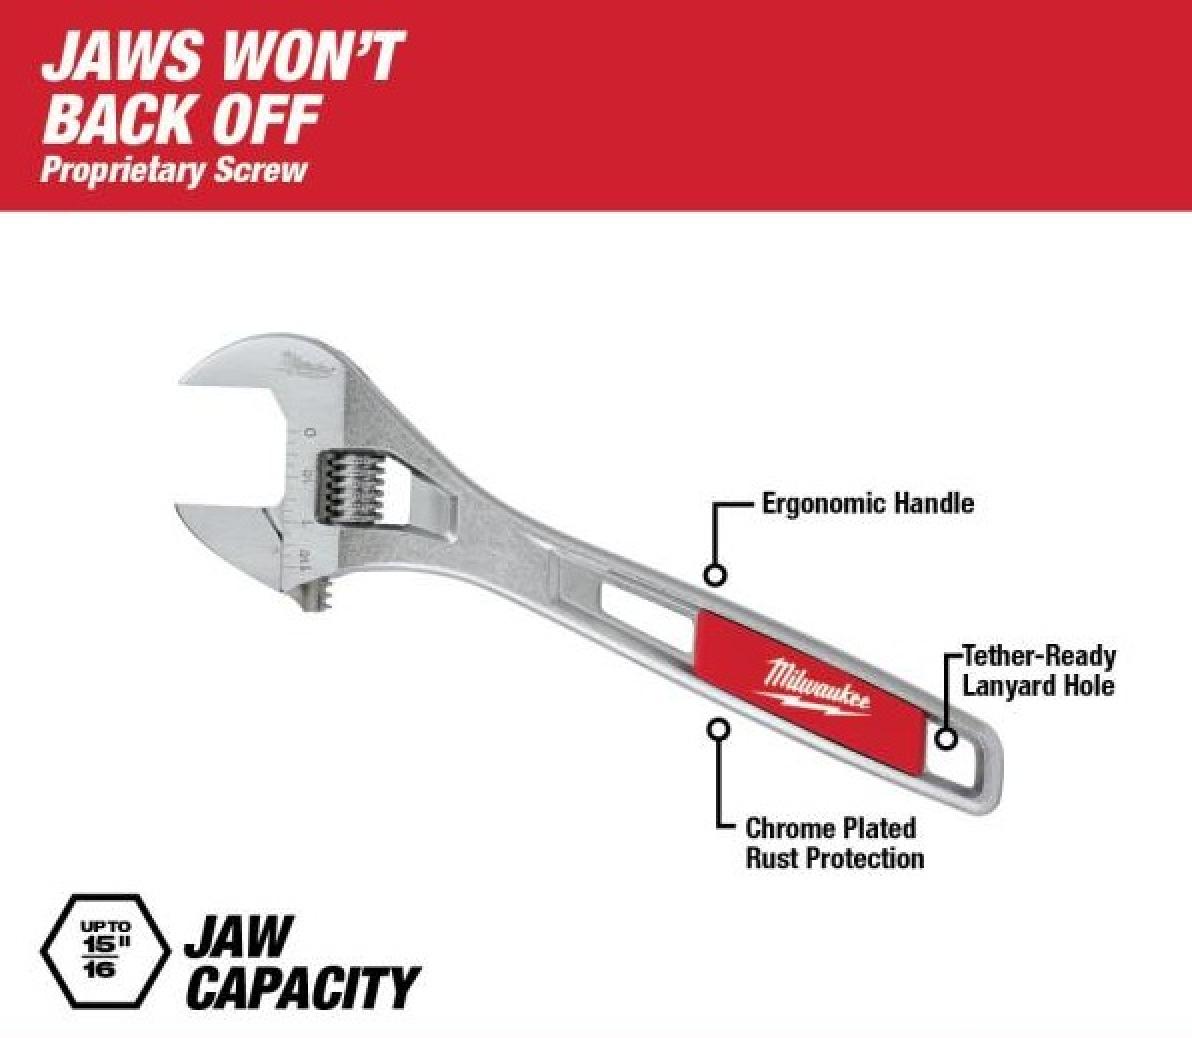 Milwaukee Adjustable Wrench 6 in